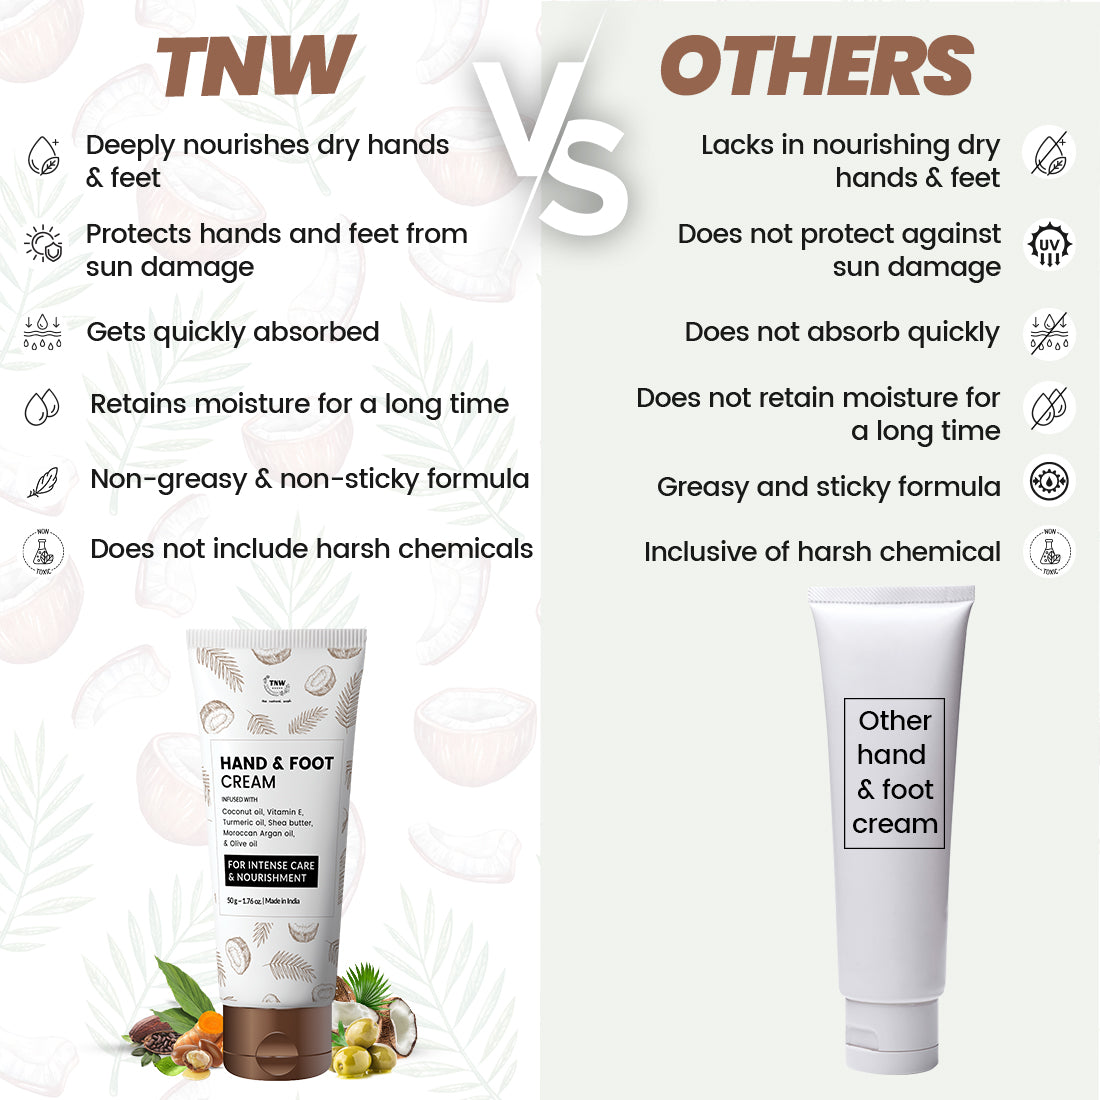 TNW Hand And Foot Cream Vs Others